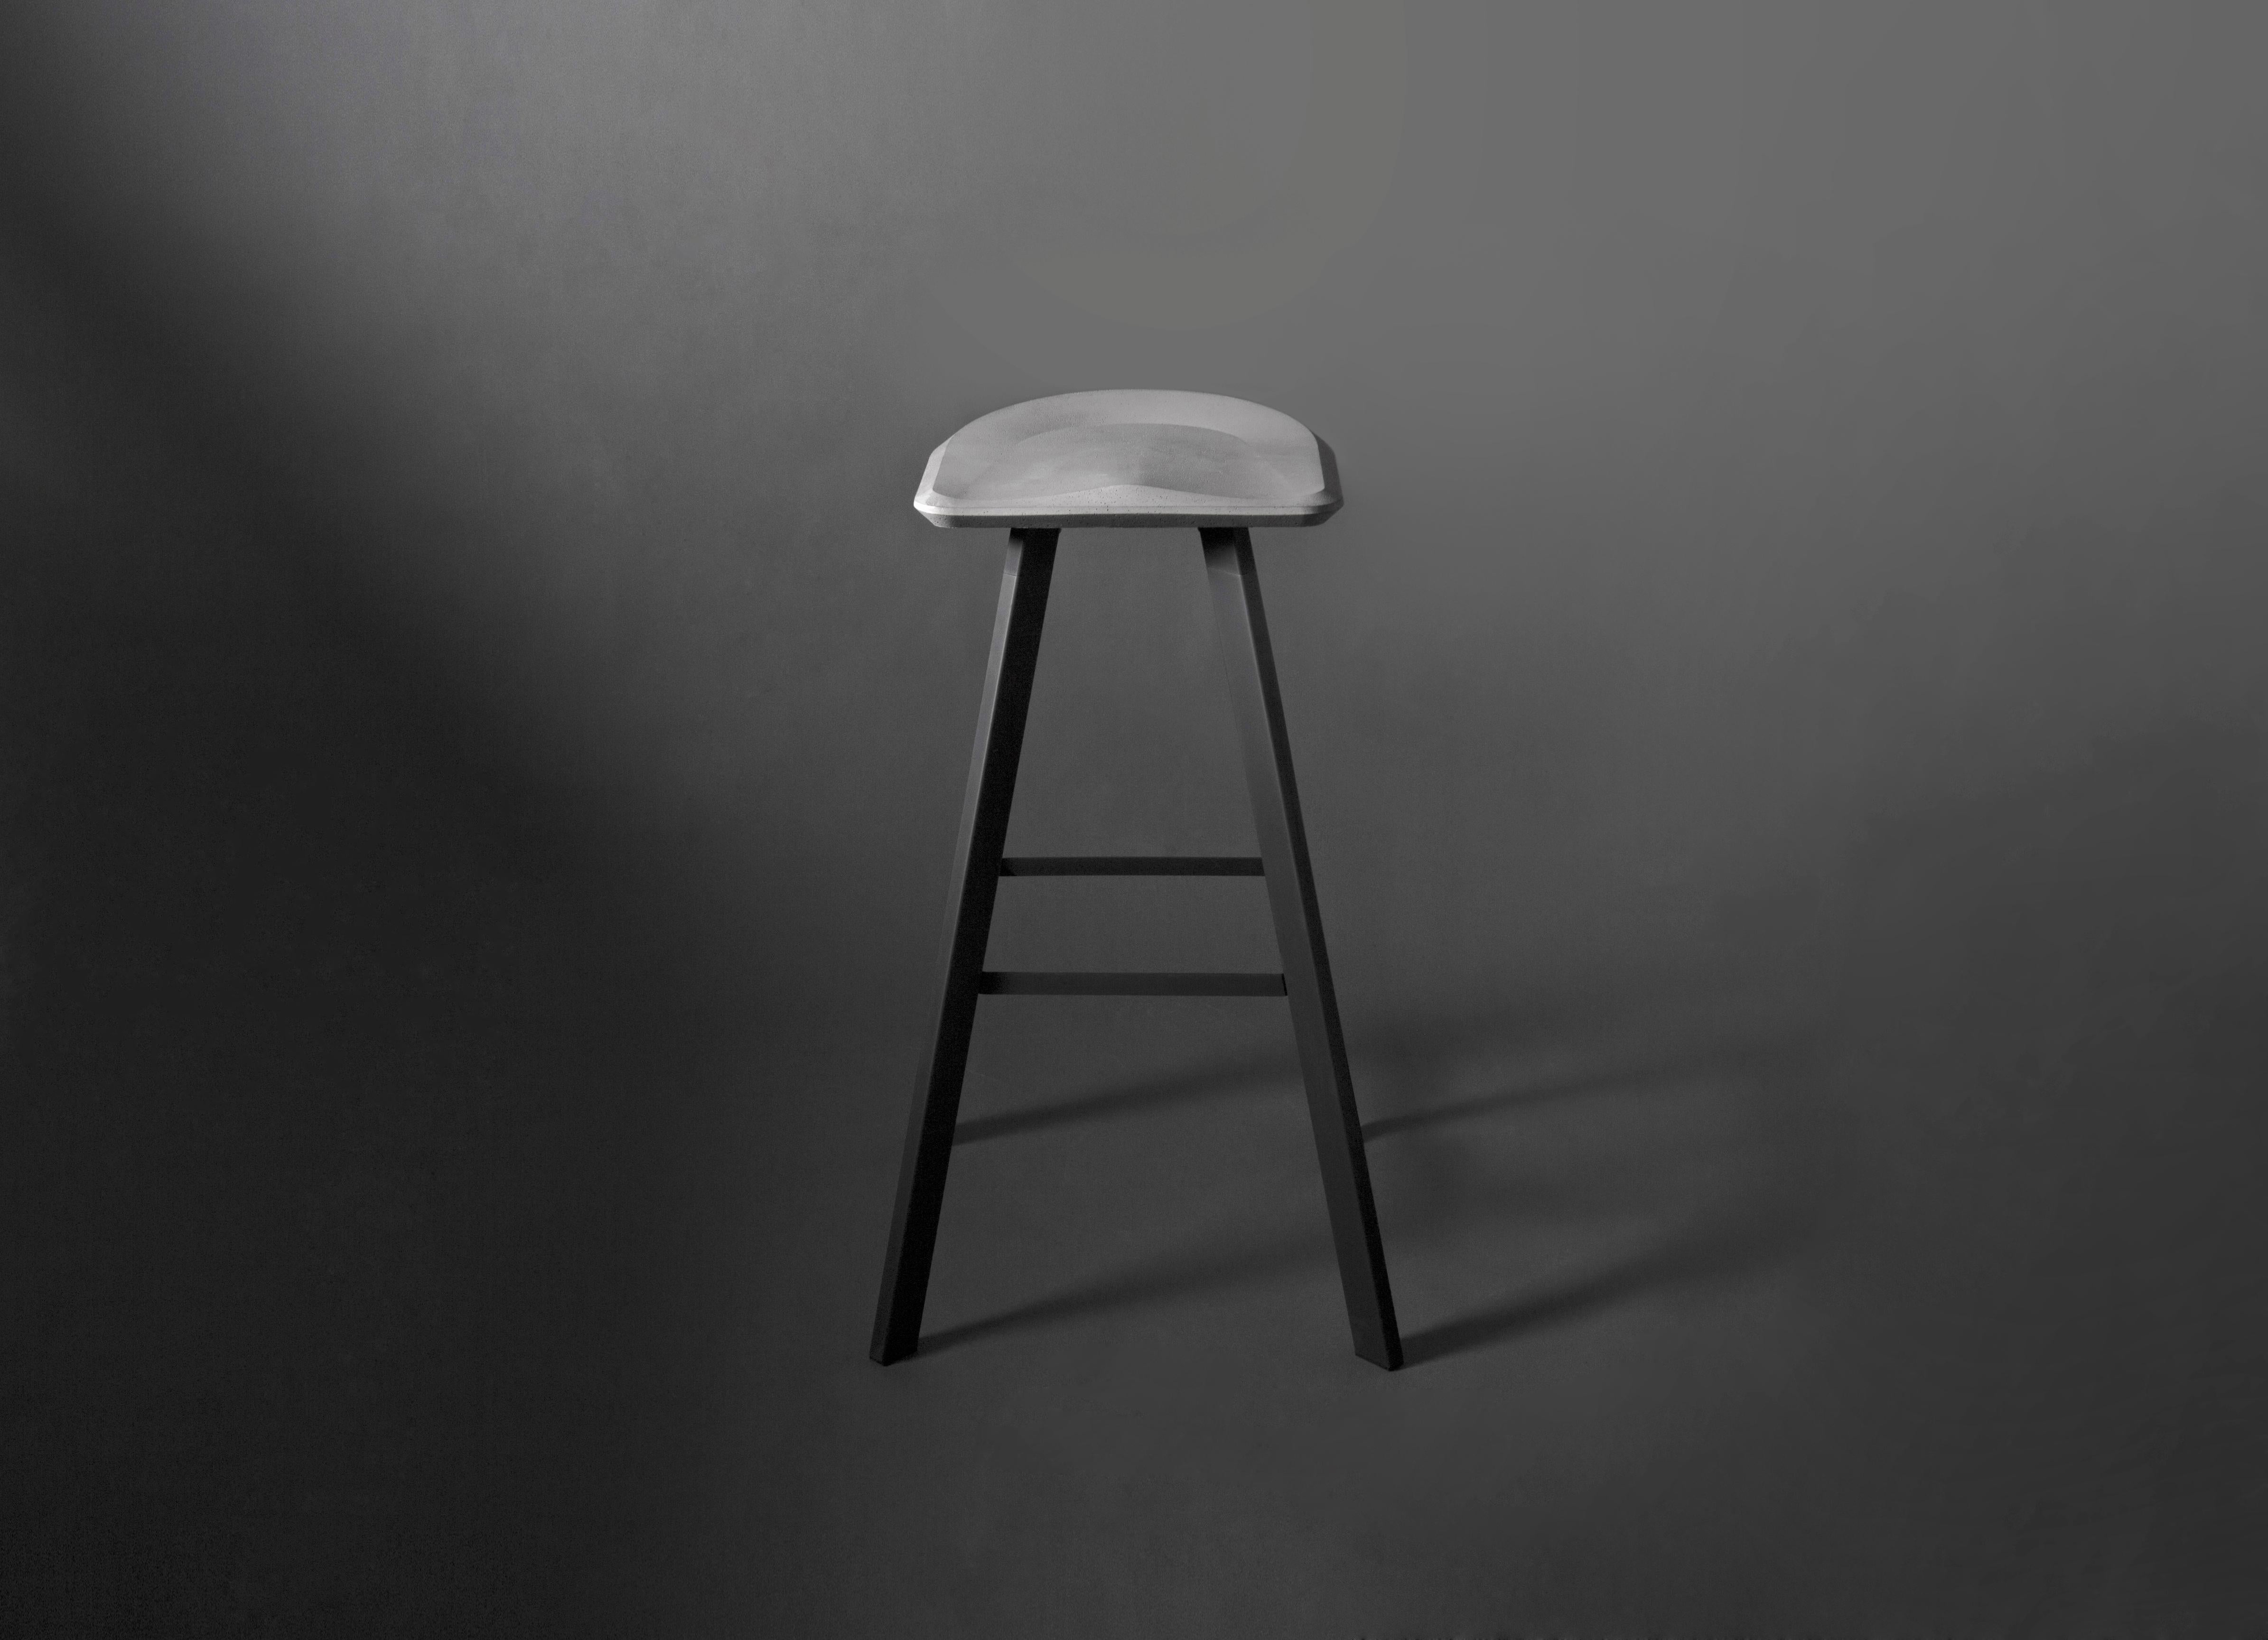 Chinese Concrete and Powder-Coated Steel Bar Stool, “A, ” from Concrete Collection